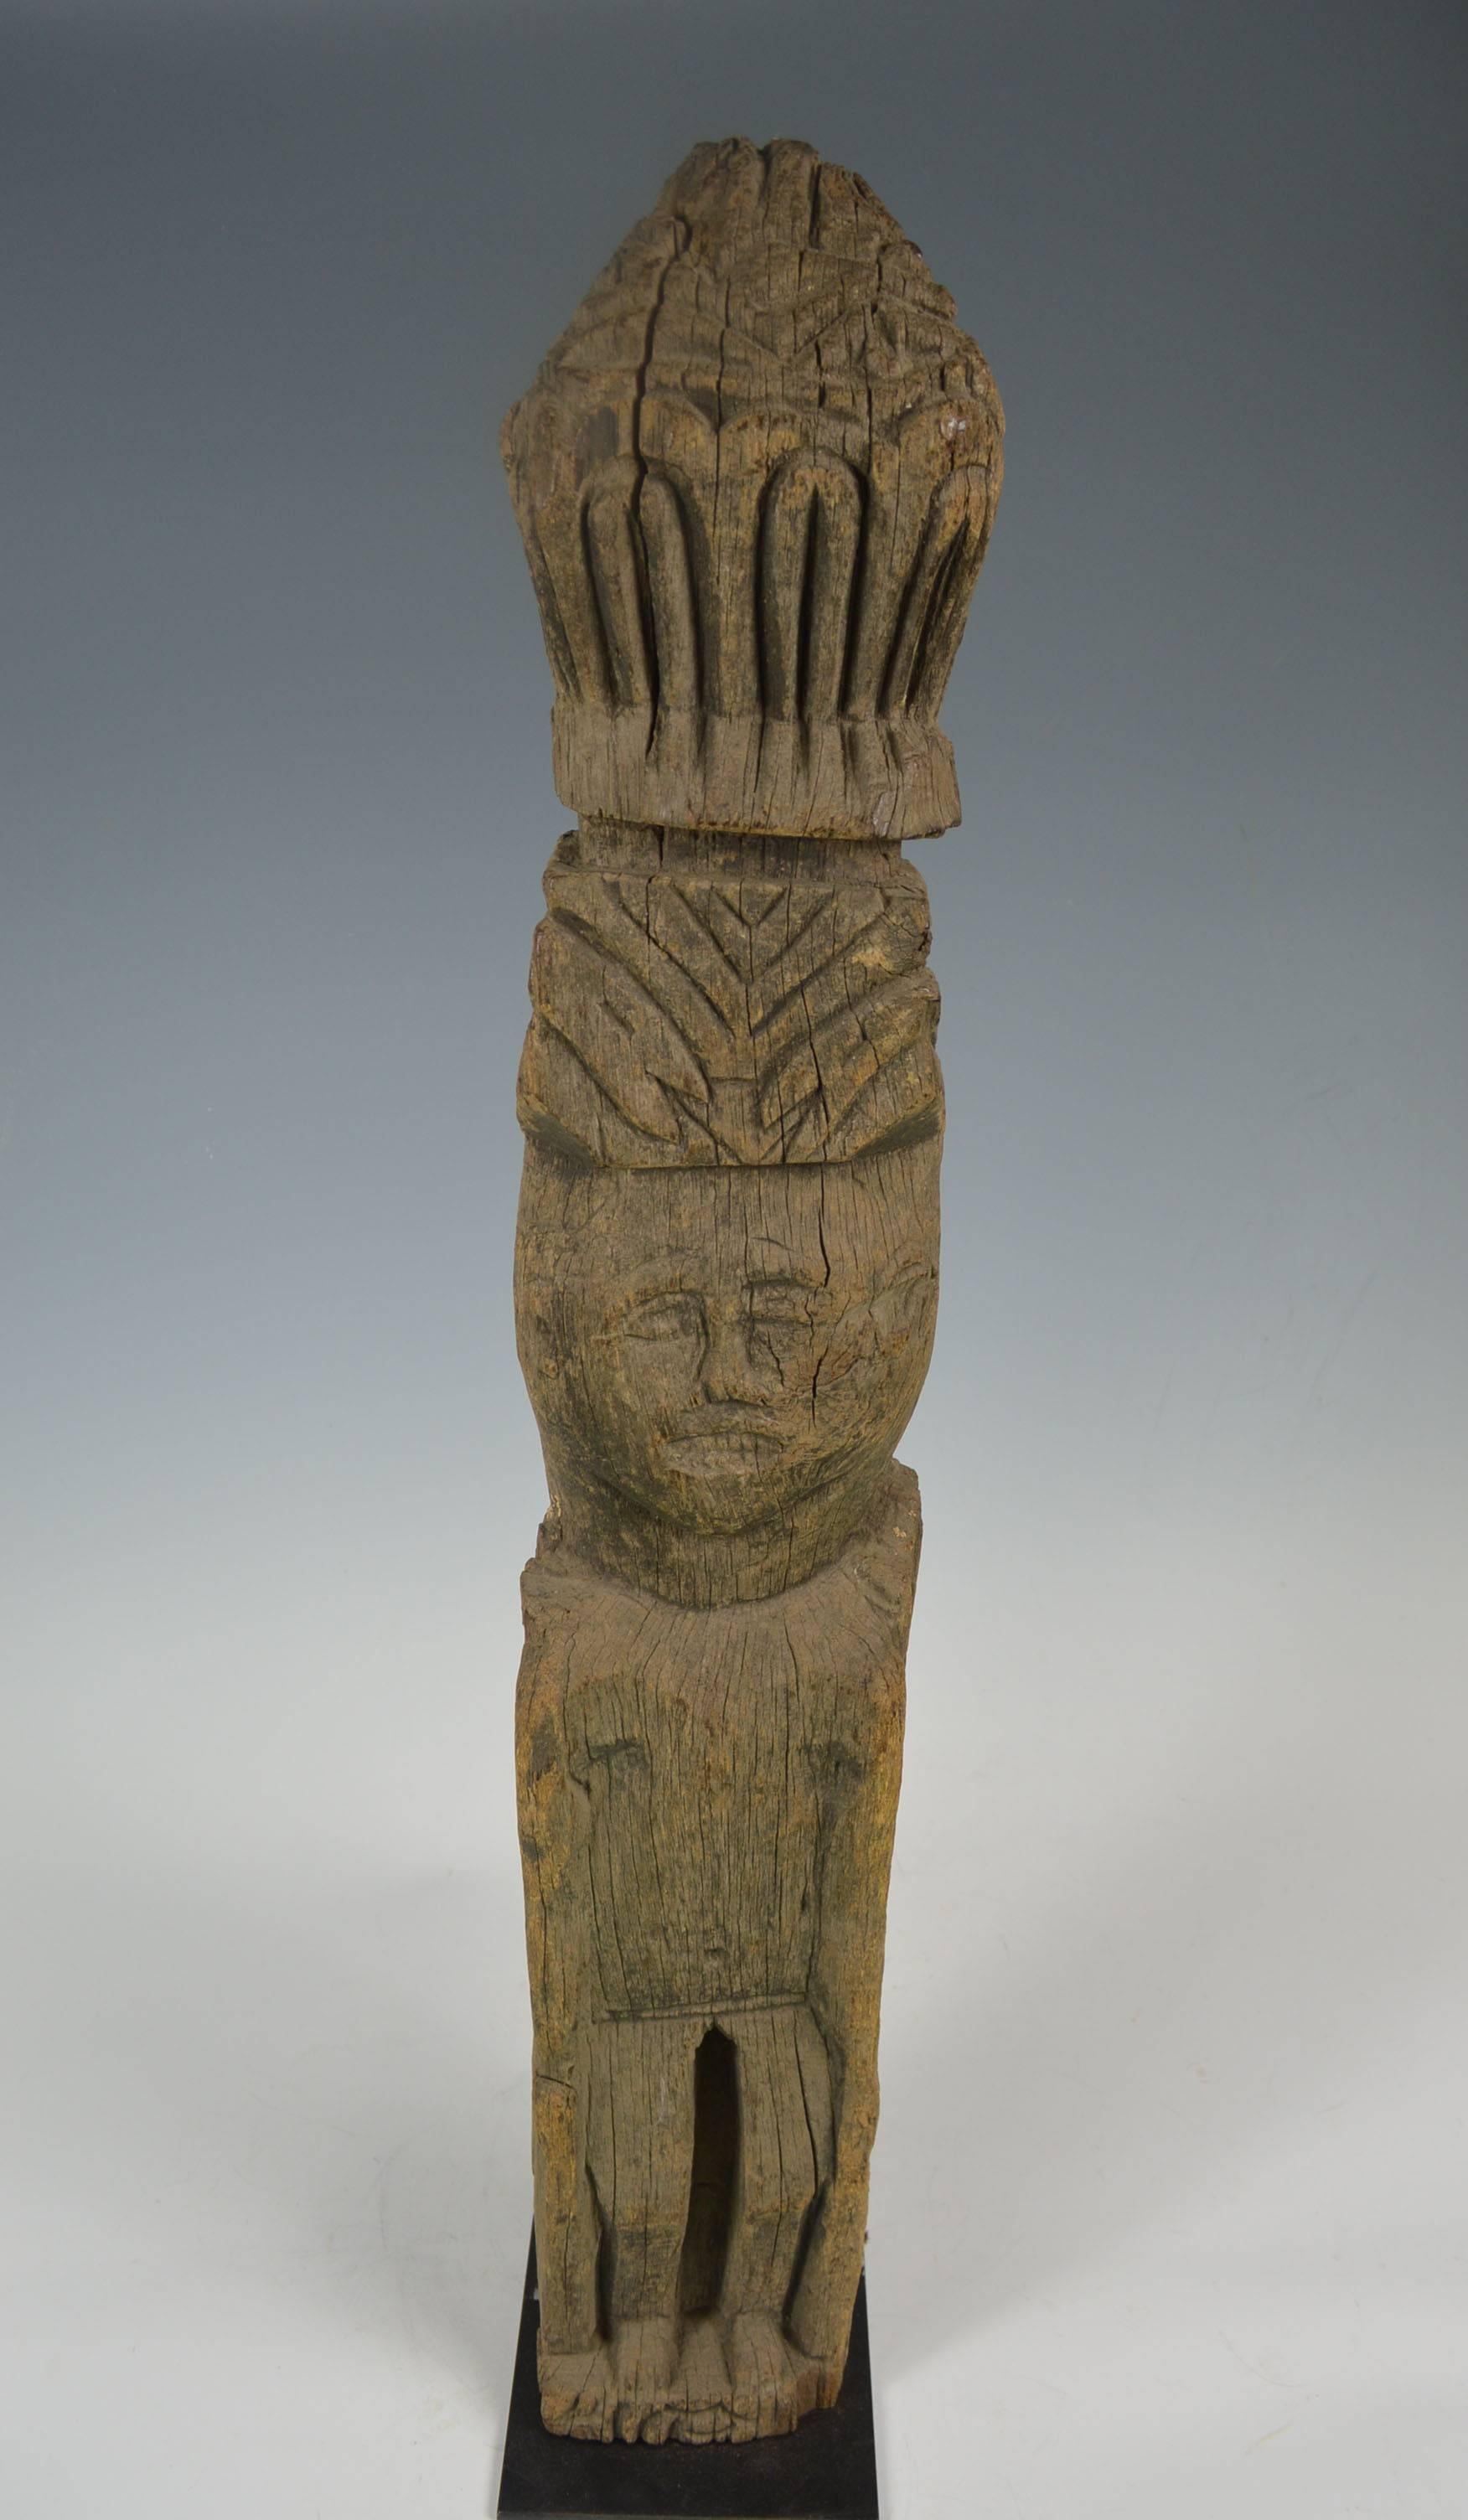 Himalayan west Nepal tribal house post figure
A very old hard wood post the front with standing primitive figure surmounted by a carved finial, the back with carved tantric symbols
Size 92 cm on metal base
Period early 19th century
Provenance: